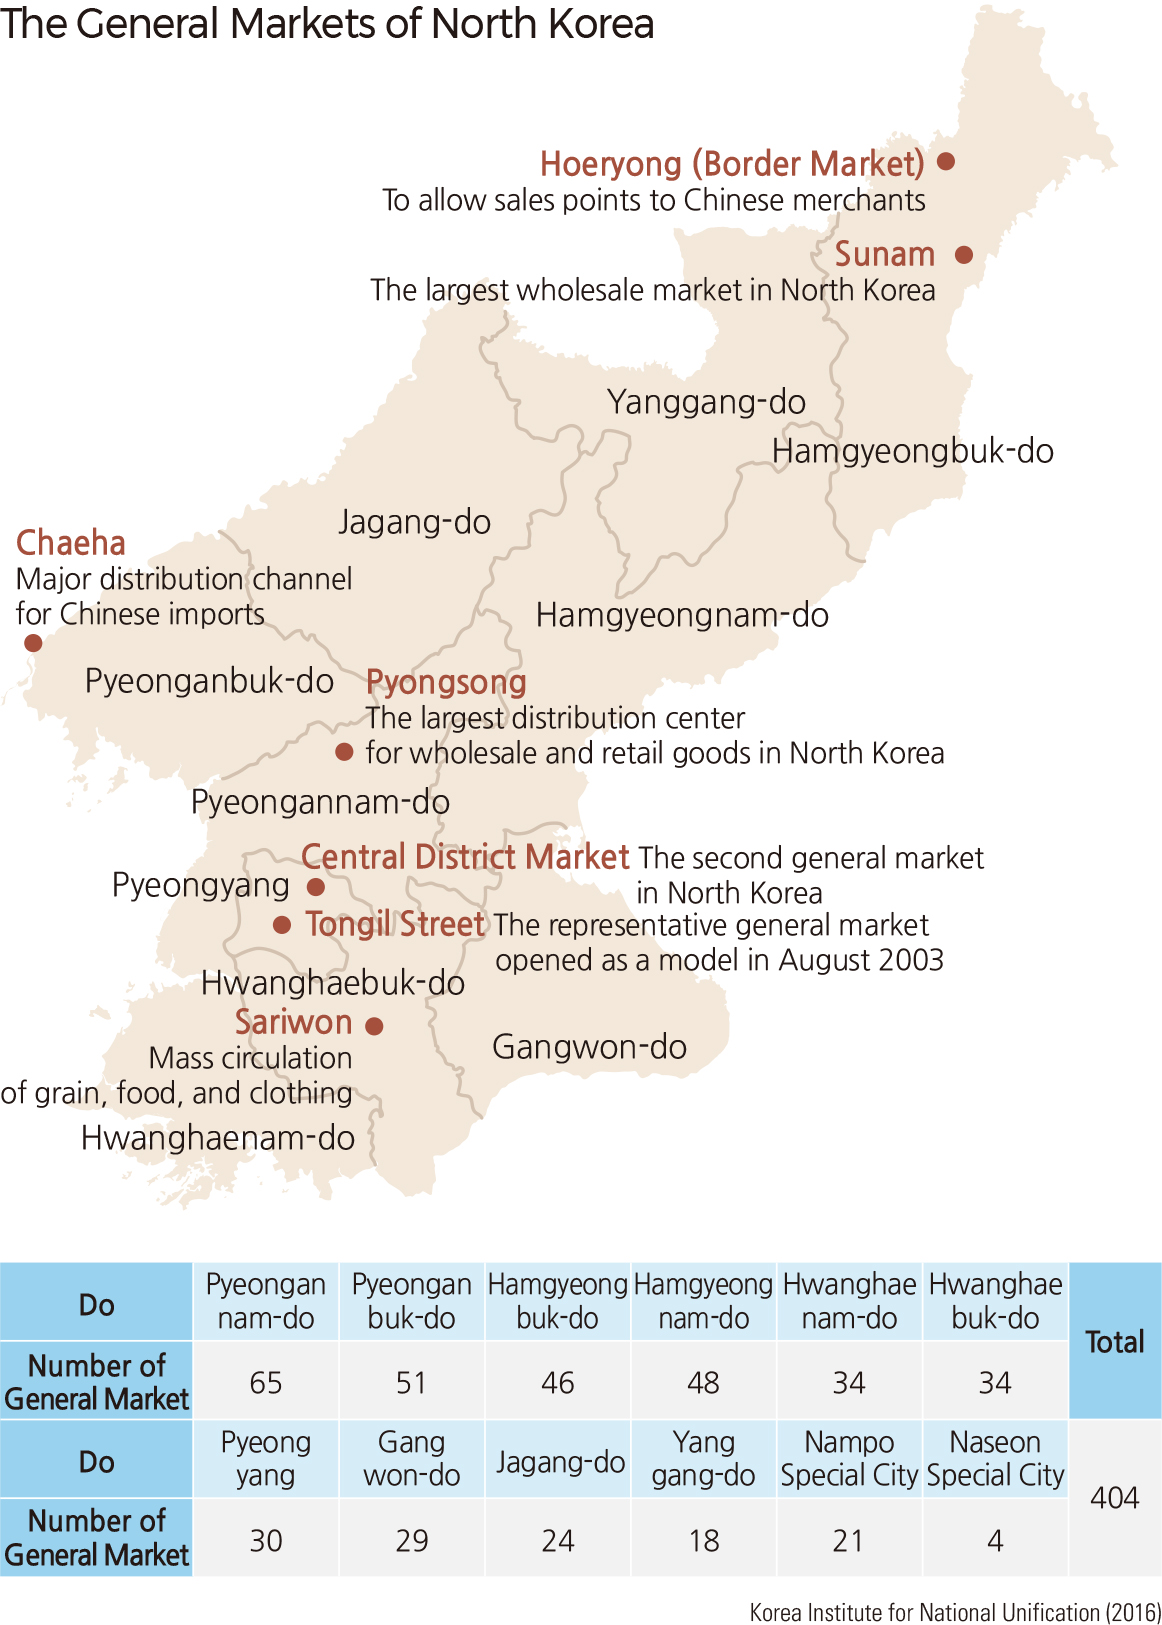 The General Markets of North Korea